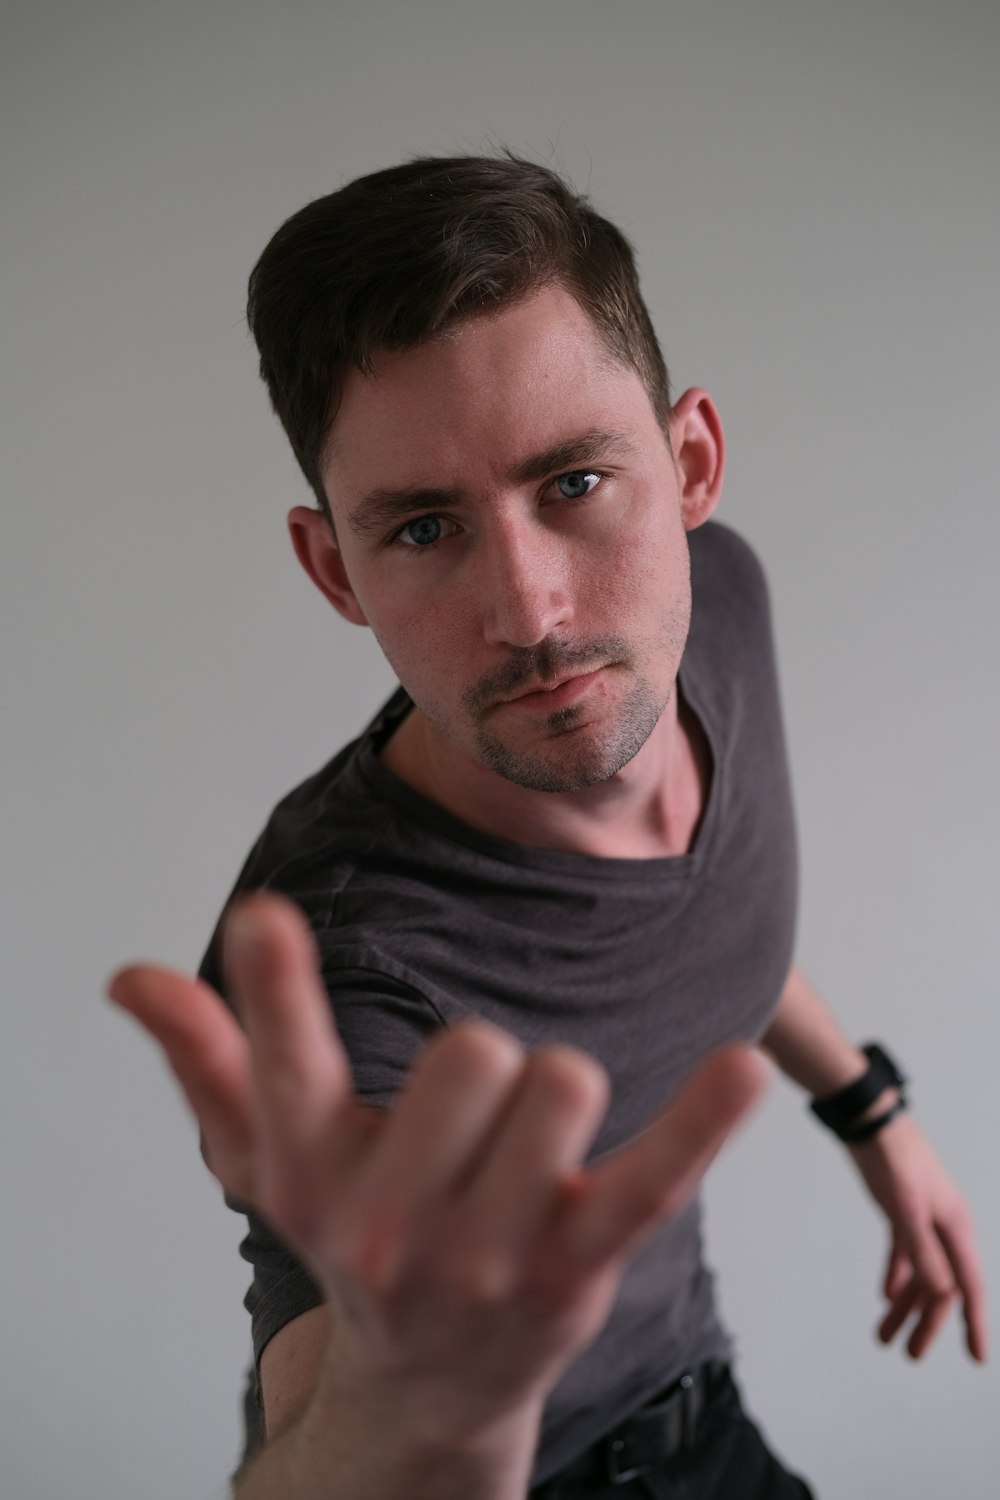 a man making a hand gesture with his fingers